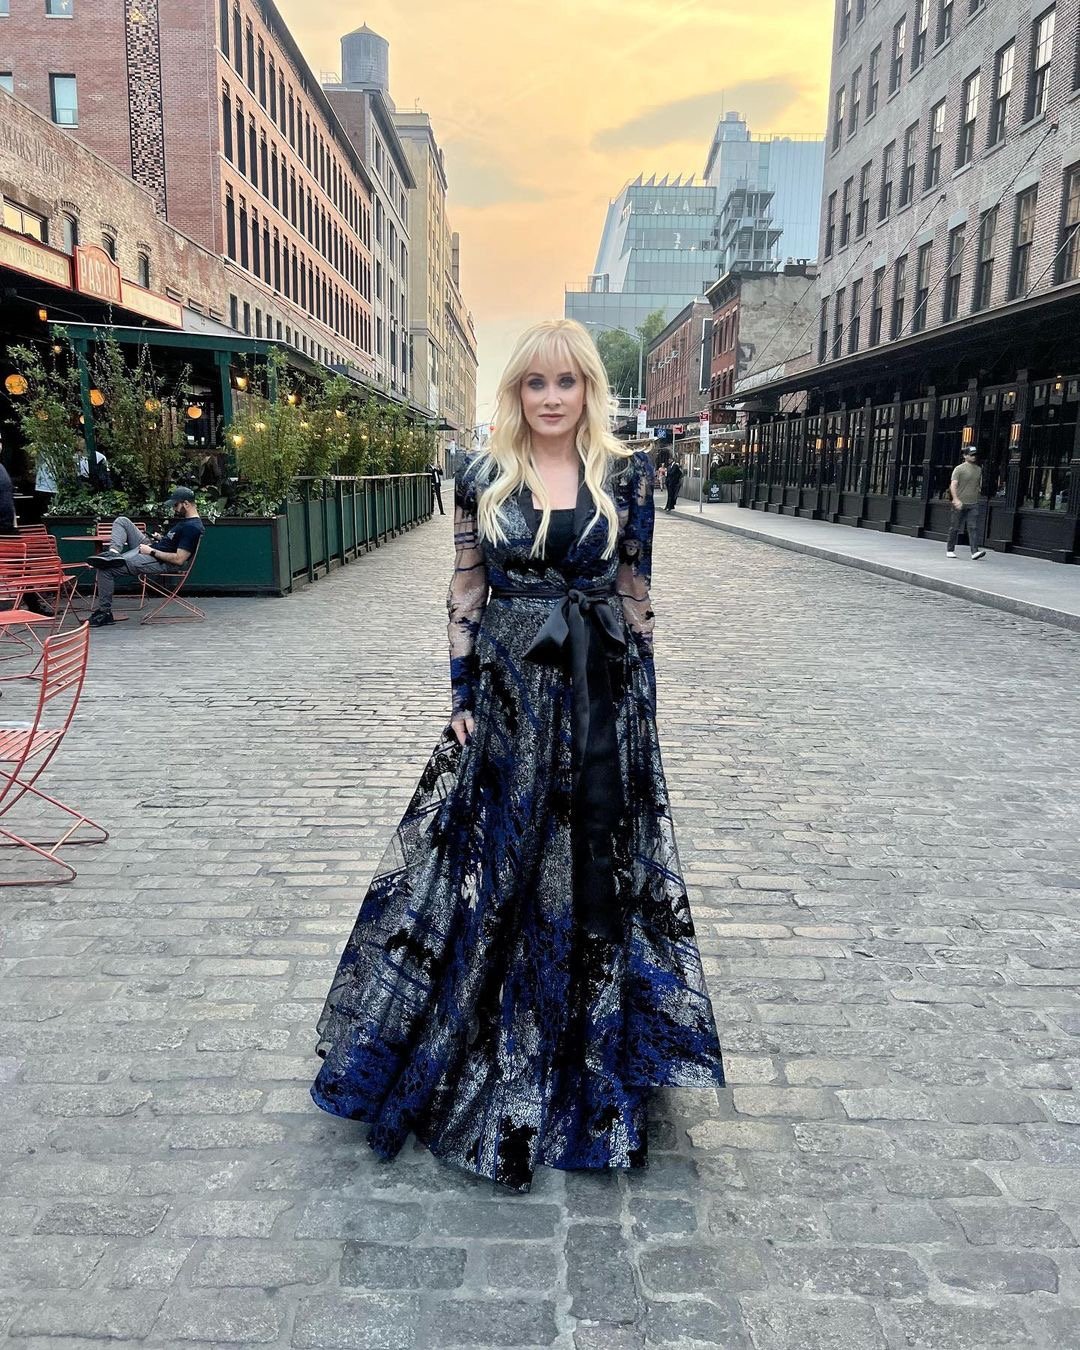  Actress Barbara Crampton wearing navy blue and black floral gown in Soho for Tribeca Film Festival.  